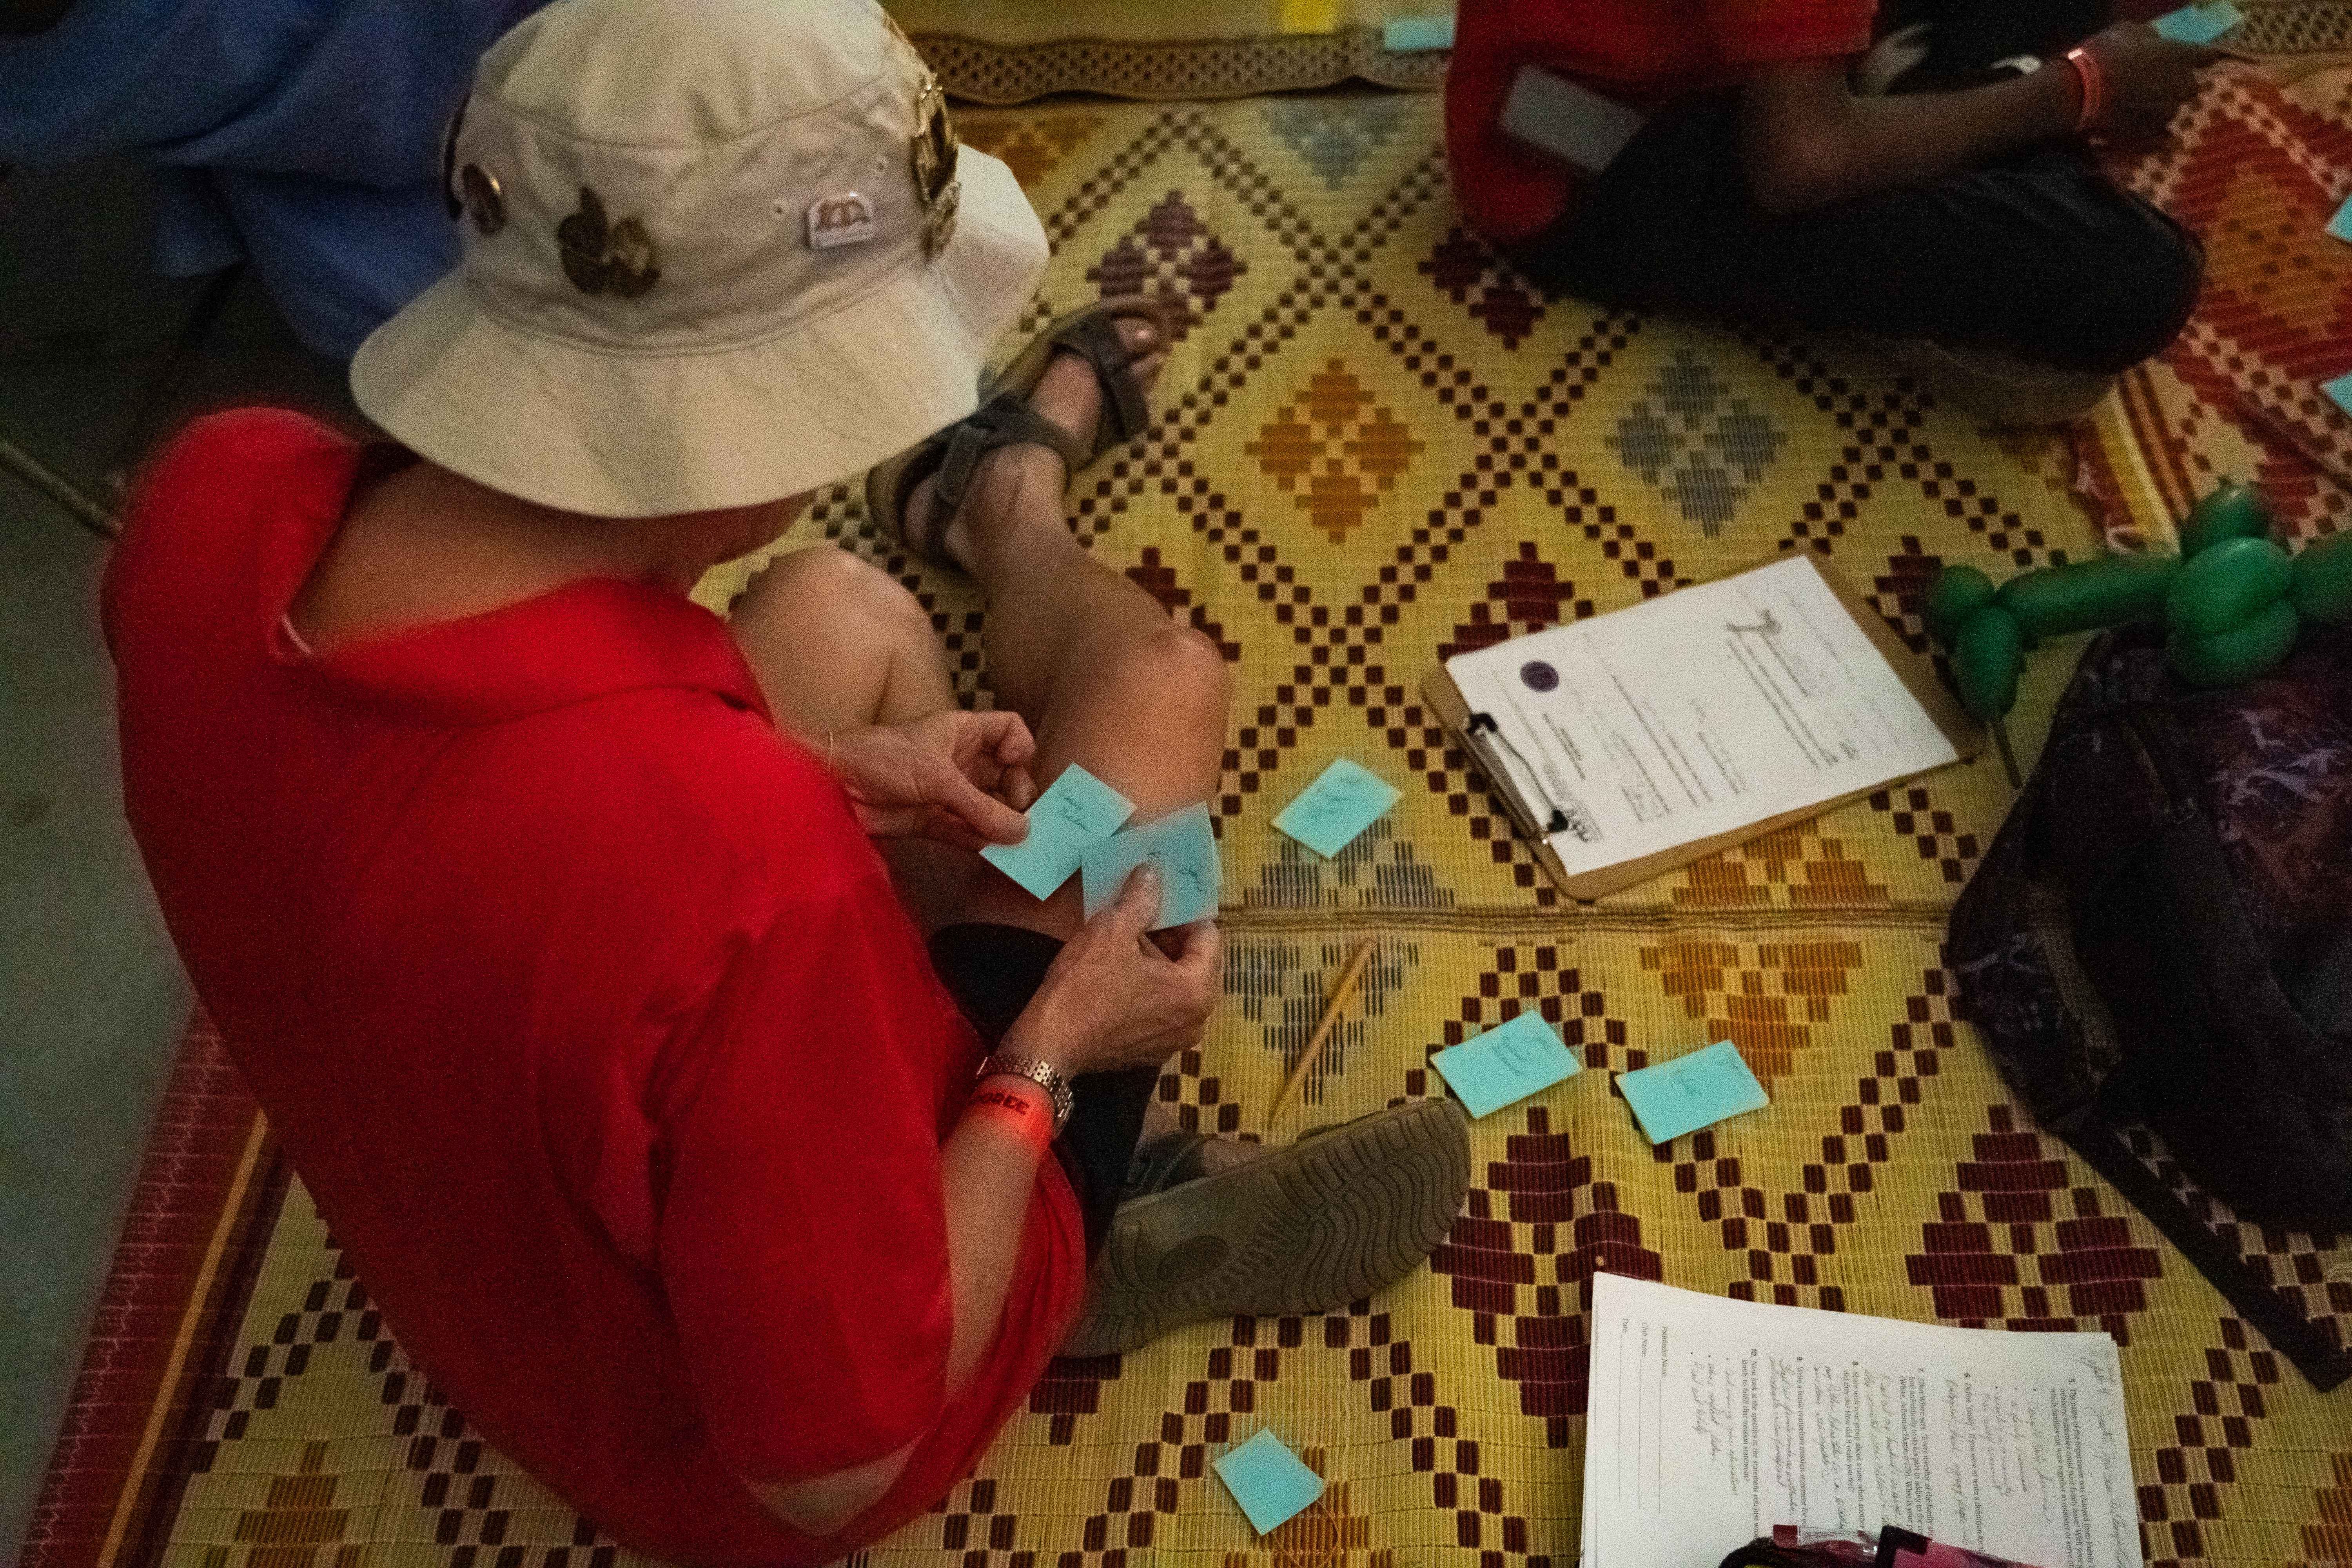 A participant of the “Refugee Assistance Honor” class carries out instructions from the loss simulation exercise, which allows attendees to imagine what life is like as a refugee.